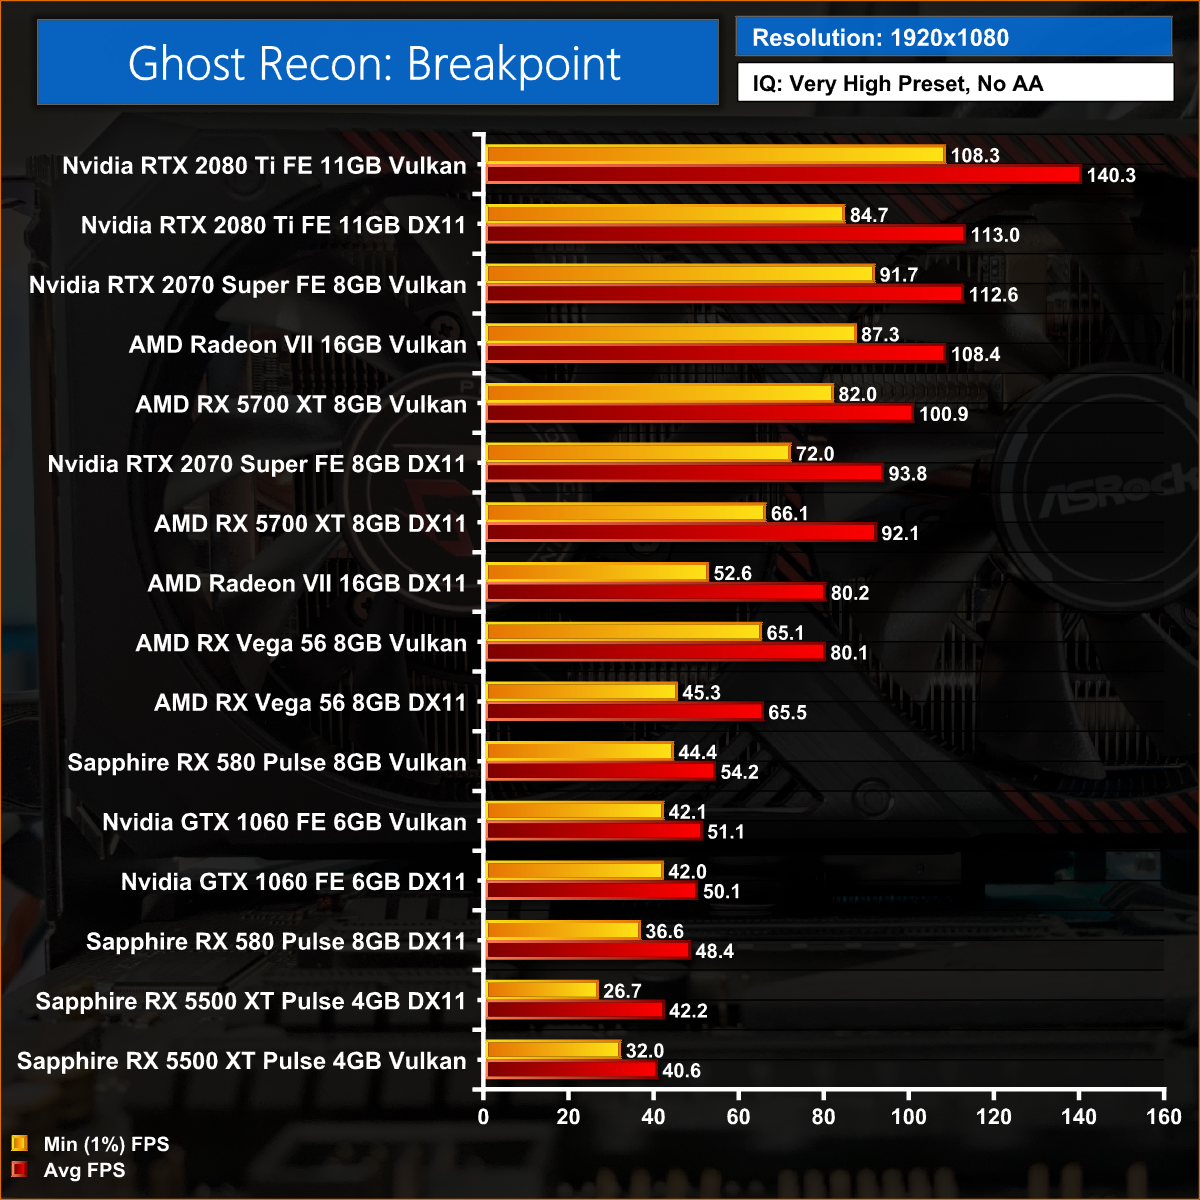 Ghost Recon: Breakpoint Vulkan vs DX11 performance analysis